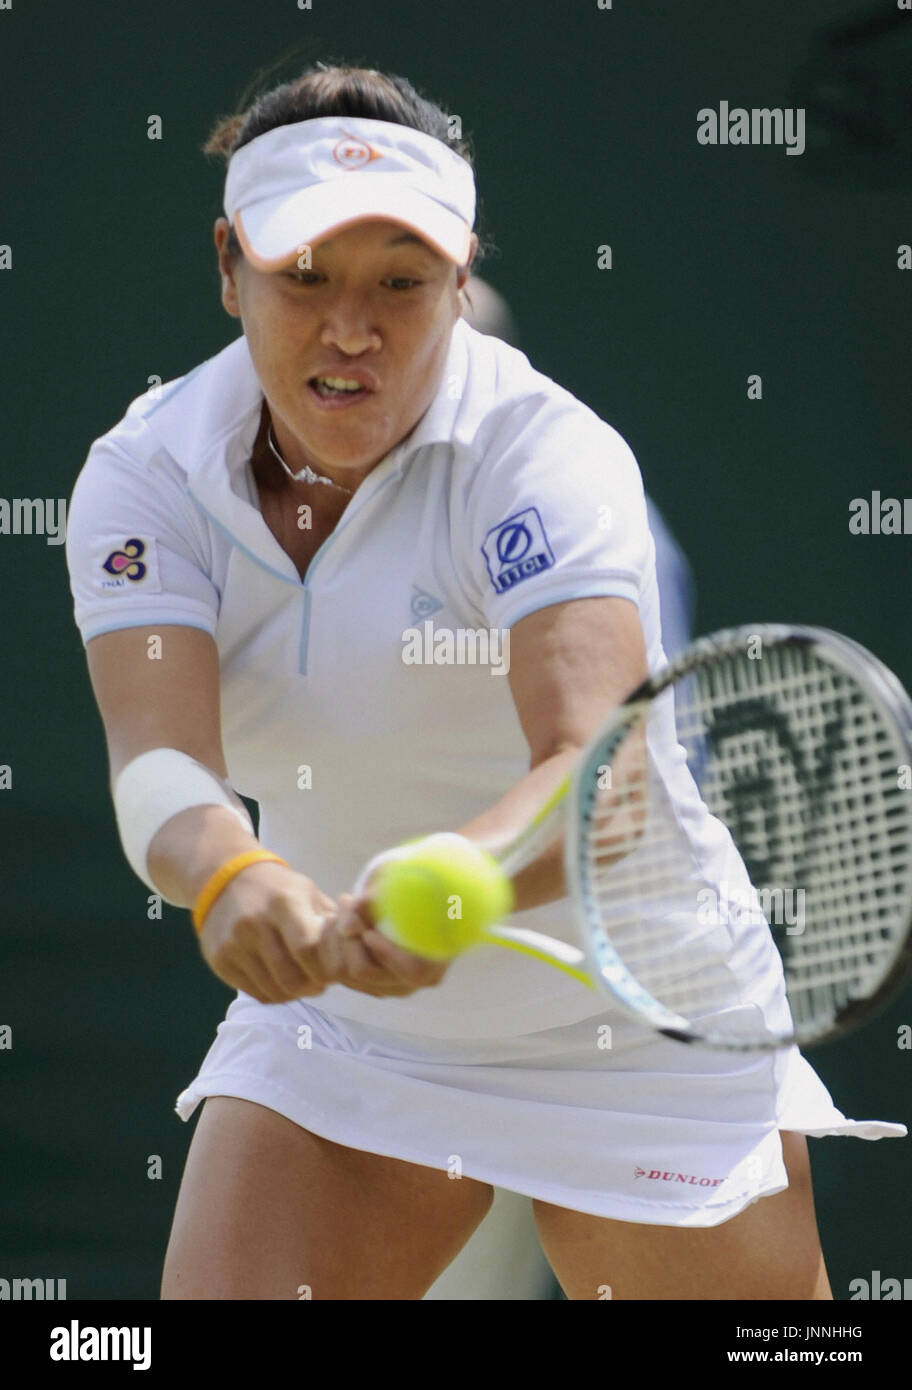 WIMBLEDON, Britain - Thailand's Tamarine Tanasugarn returns the ball to Serbia's Jelena Jankovic during their fourth-round match at the Wimbledon tennis championships at All England Court in London June 30. Second seed Jankovic was defeated 6-3, 6-2. (Kyodo) Stock Photo